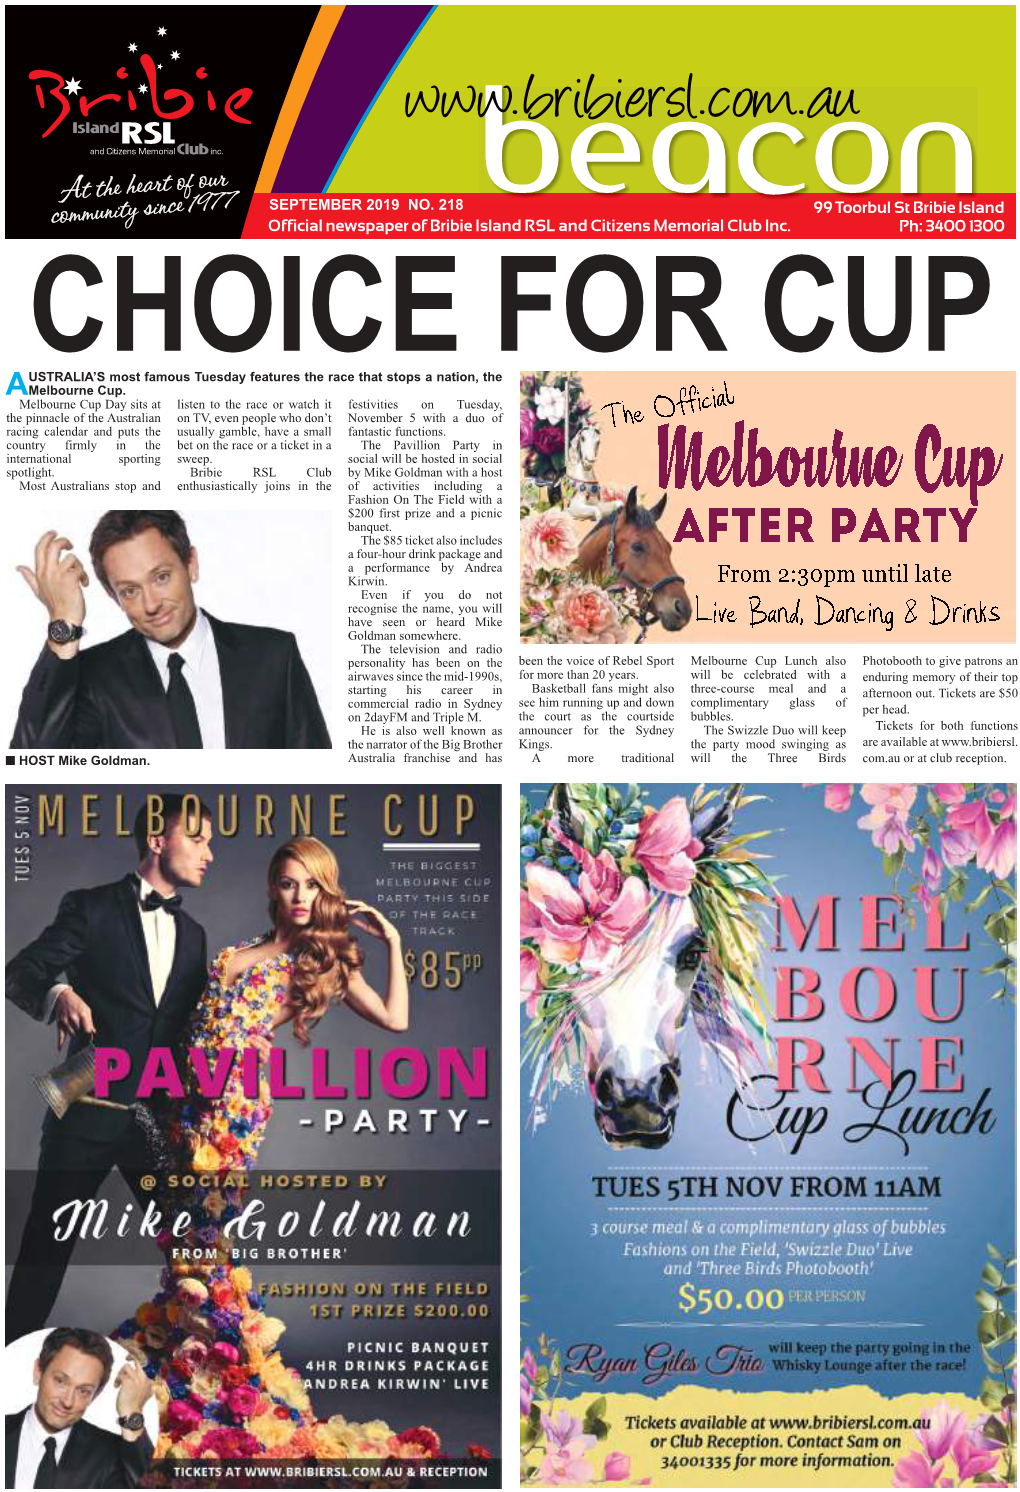 SEPTEMBER 2019 NO. 218 CHOICE for CUP USTRALIA’S Most Famous Tuesday Features the Race That Stops a Nation, the Amelbourne Cup